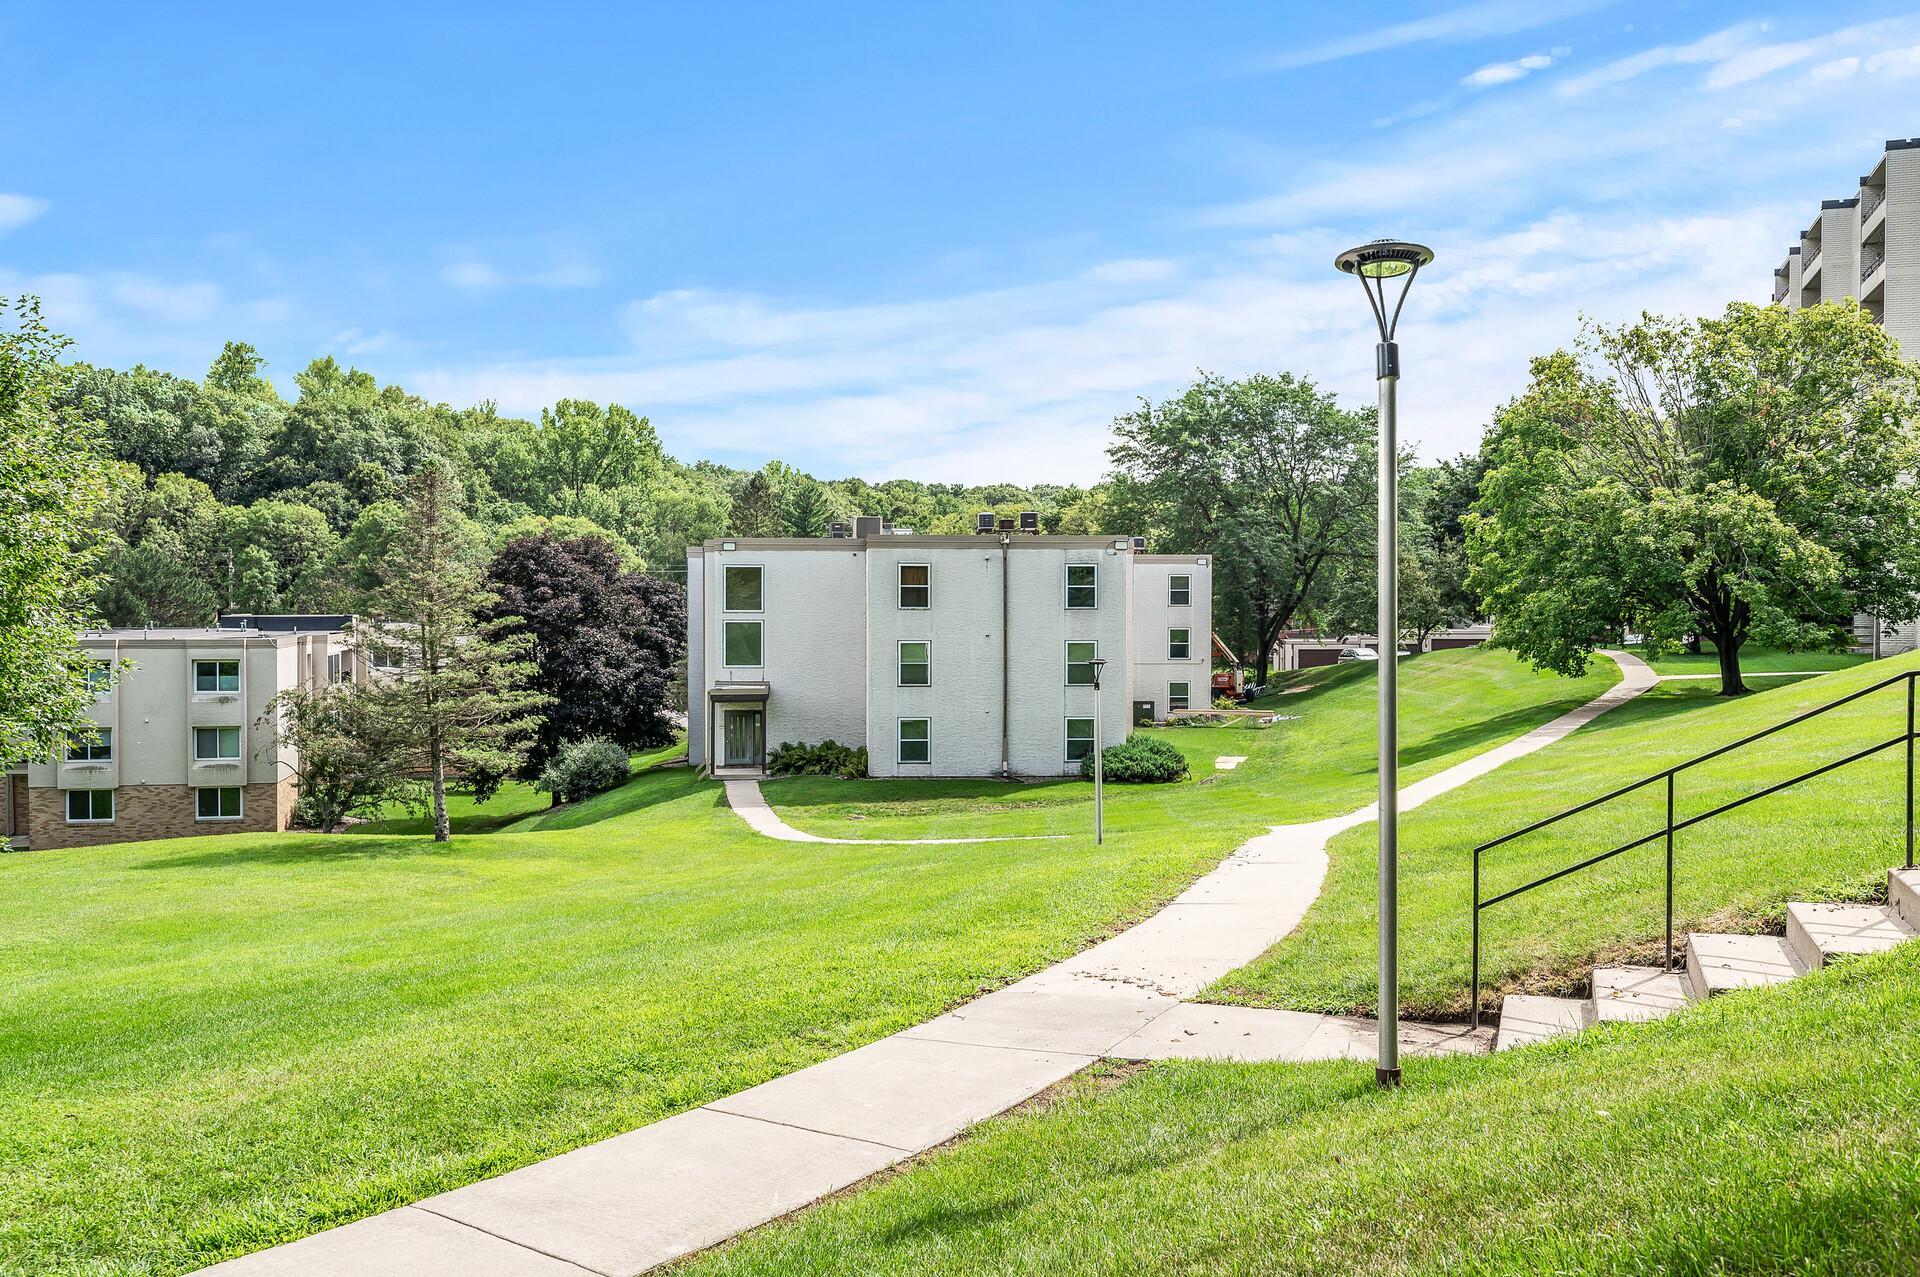 Move-in ready two bedroom condo with wonderful shared amenities!